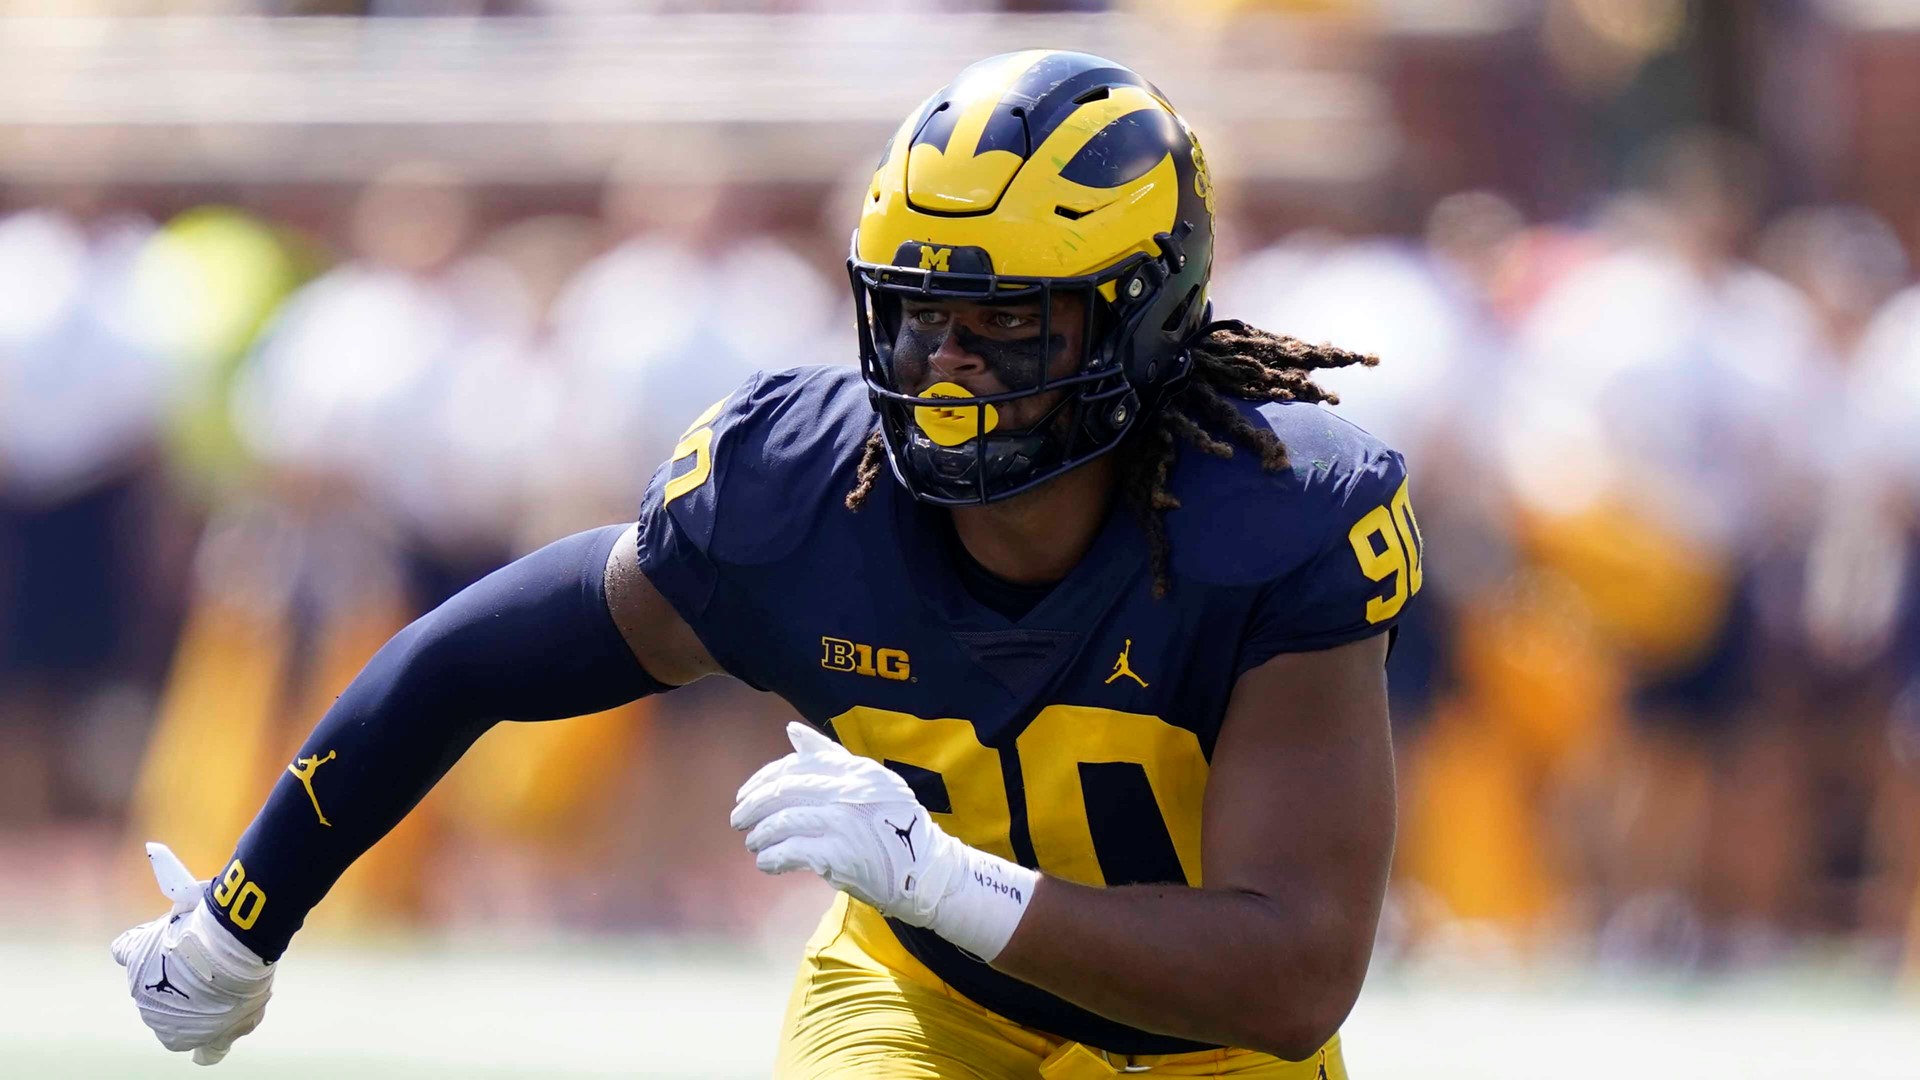 Michigan star defensive lineman was slowed down by injuries to end regular season, but is back and ready to produce in the Fiesta Bowl.